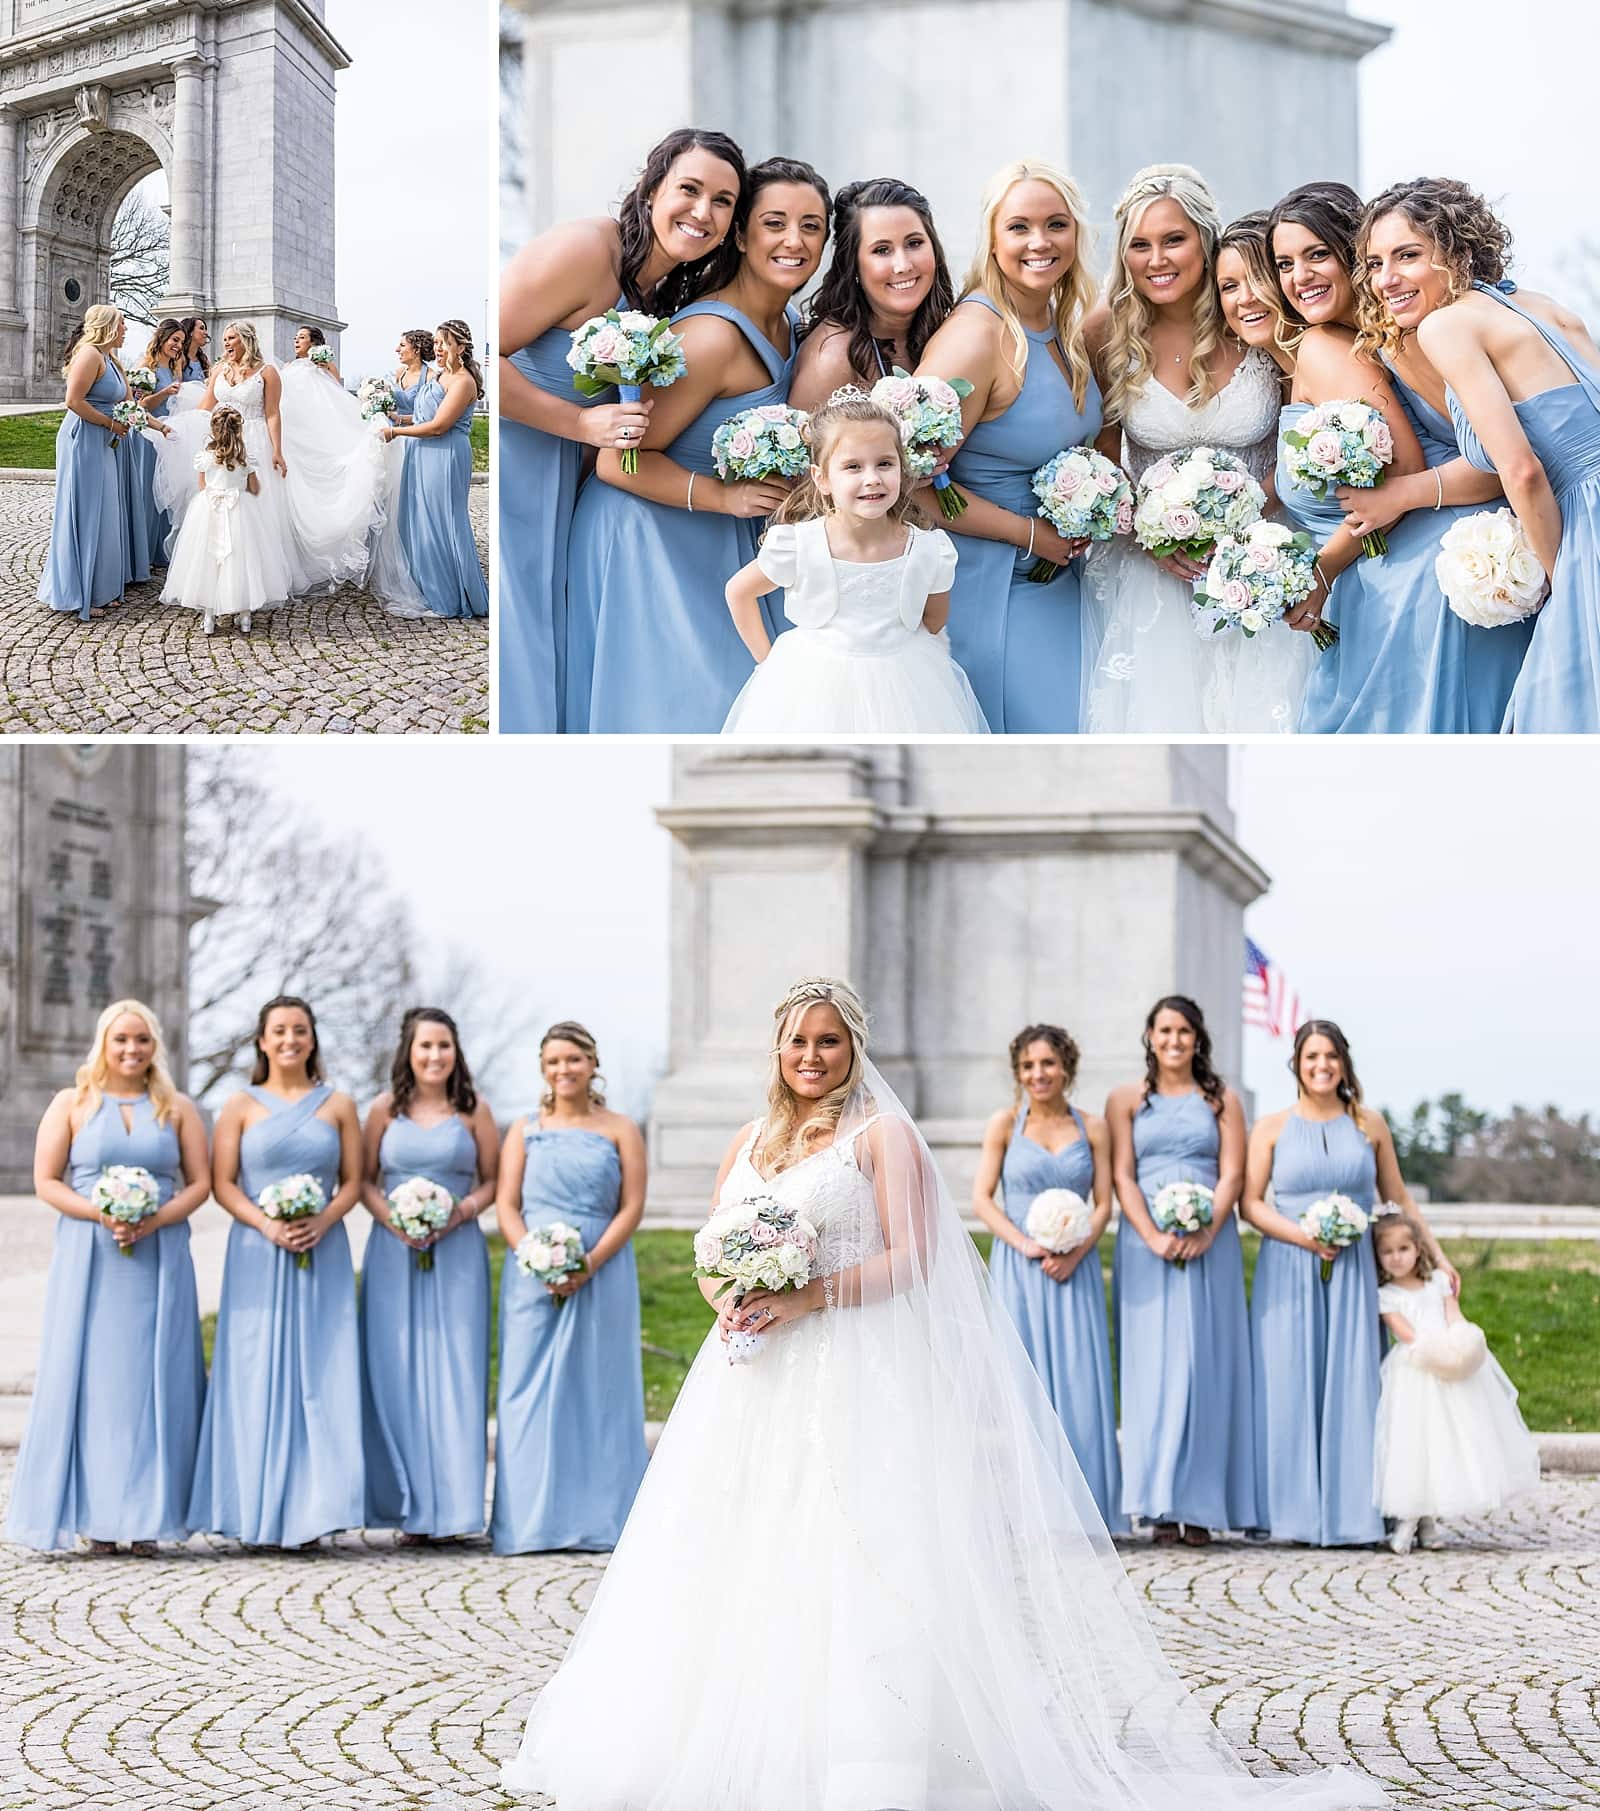 Bridal party portraits at the memorial arch in Valley Forge National Park.